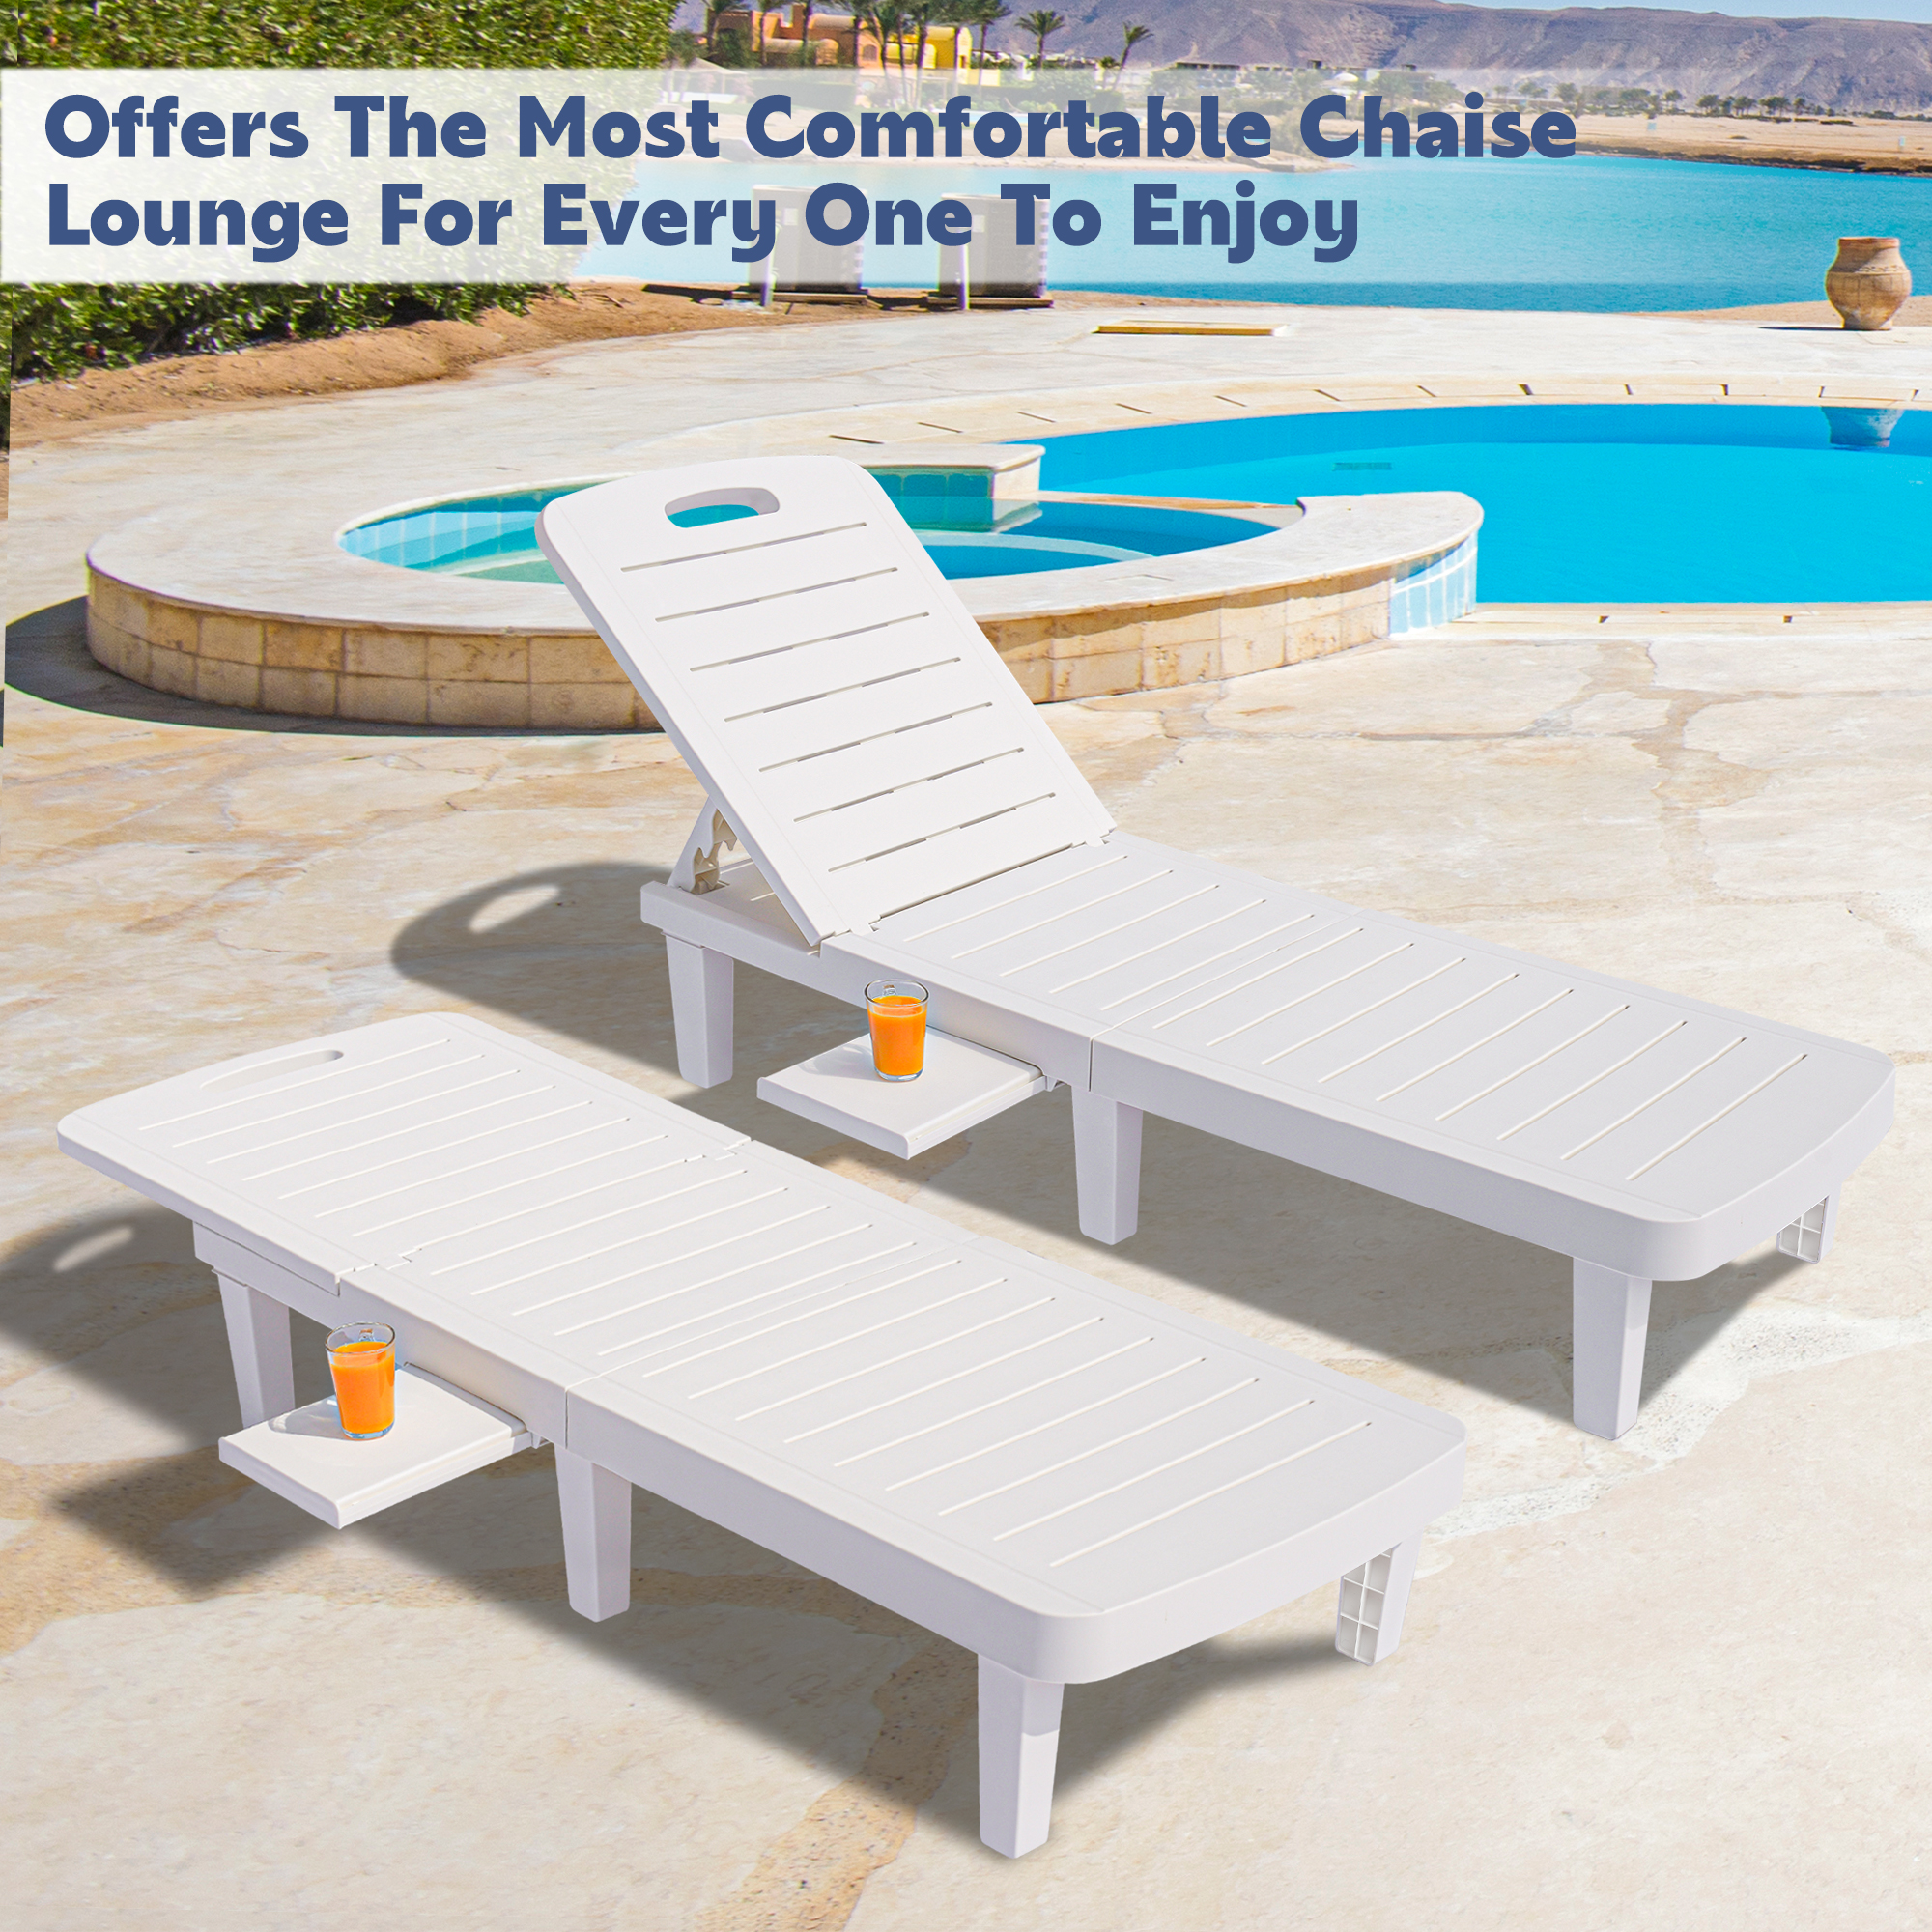 Segmart Outdoor Patio Lounge Furniture Set, 2 Pieces Adjustable Wicker Chaise Chairs with Side Table, Poolside Chaise Lounge Set for Poolside Deck Graden, SS2117 - image 4 of 10